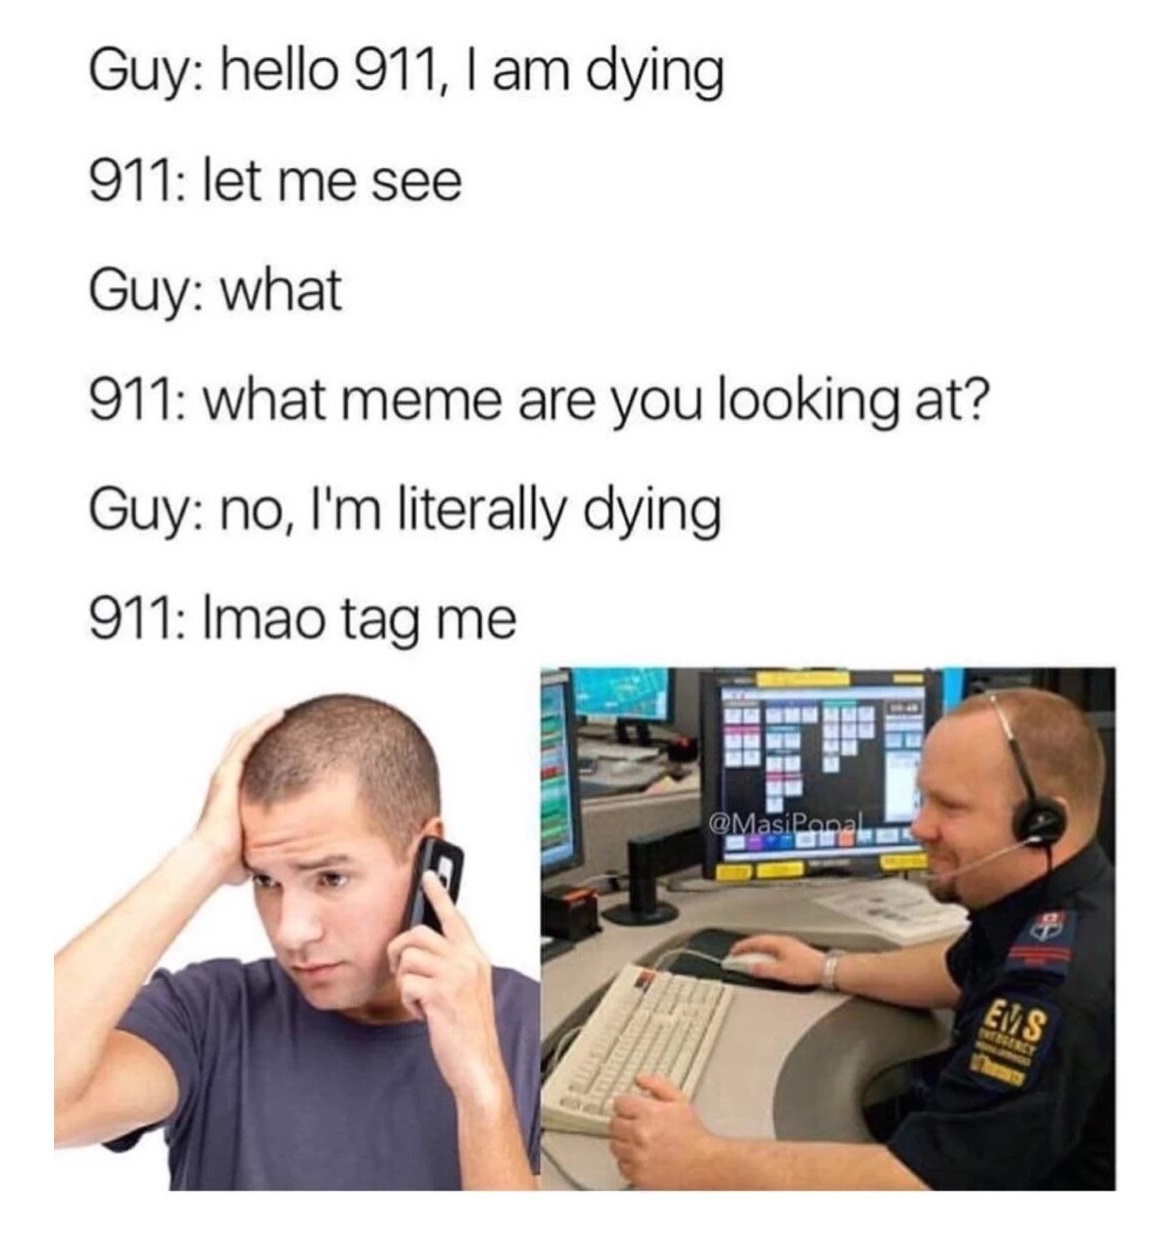 Meme of someone calling 911 to complain they are dying and responder assumes it is from hilarious meme, requests he tag him.